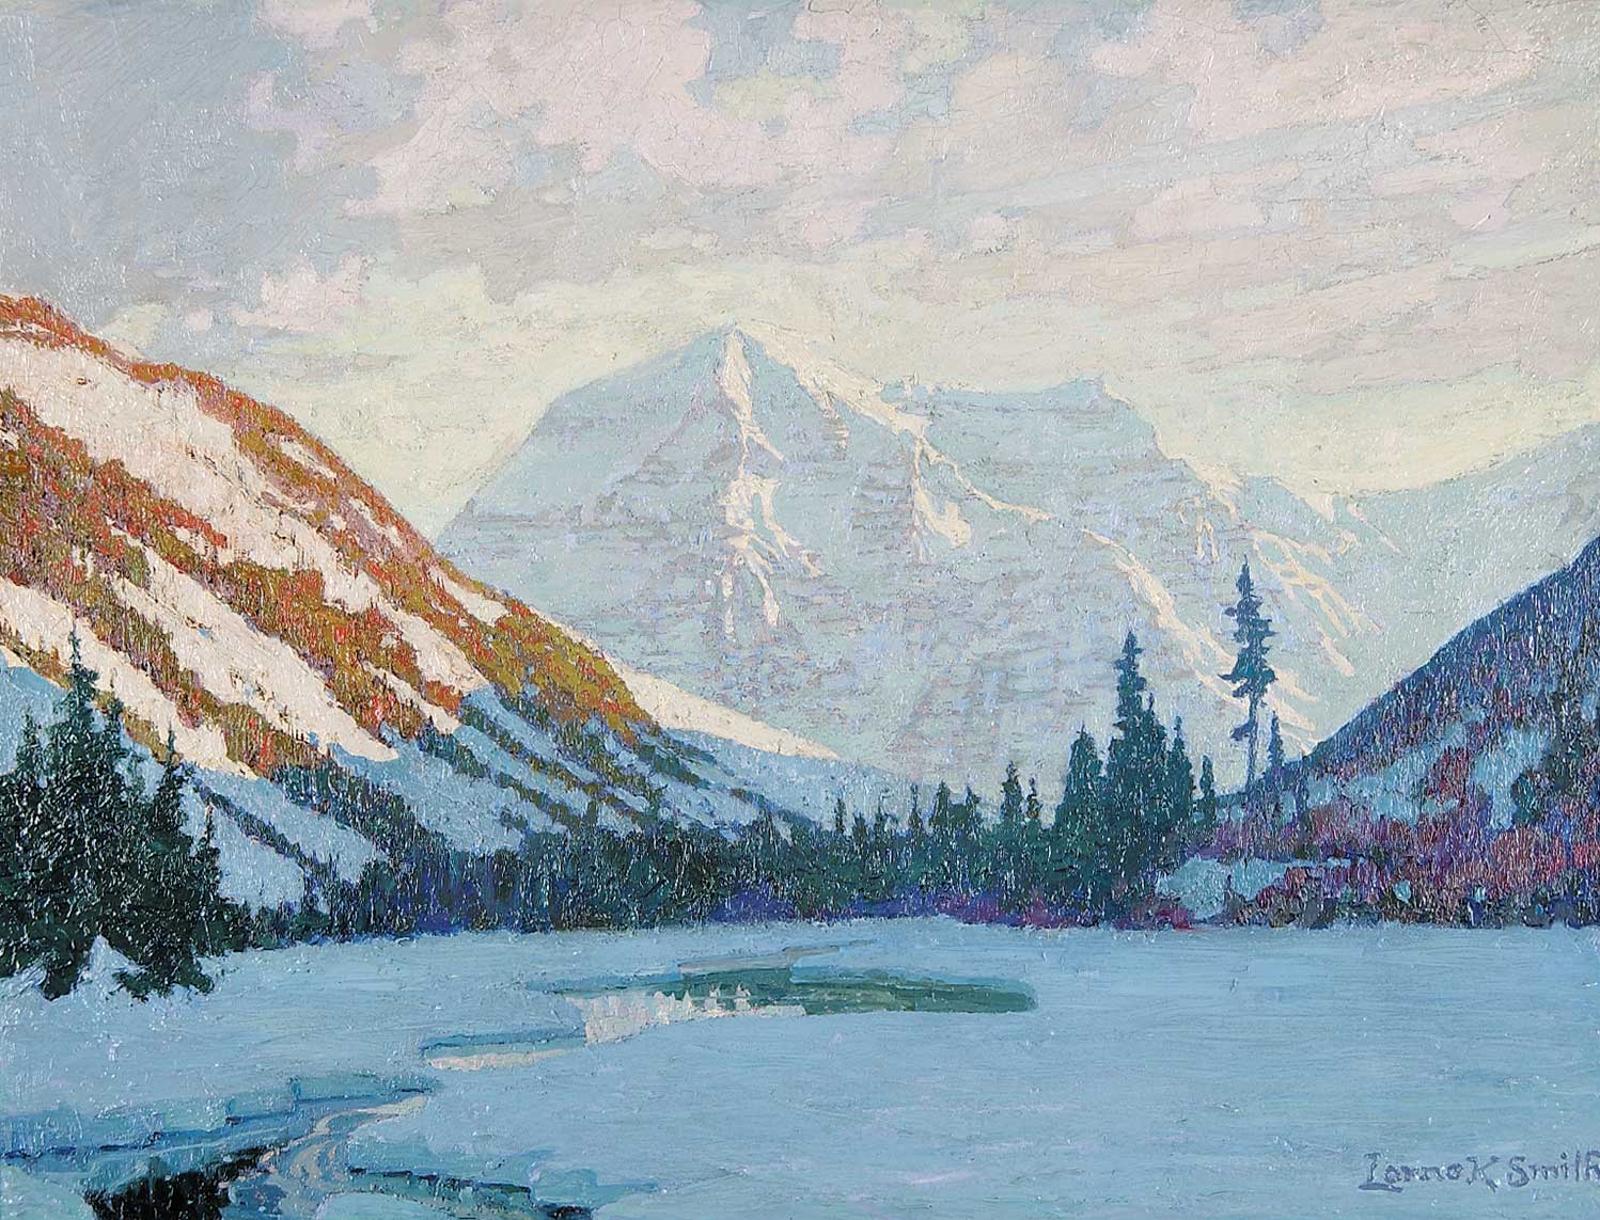 Lorne Kidd Smith (1880-1966) - Untitled - Spring Comes to the Rockies